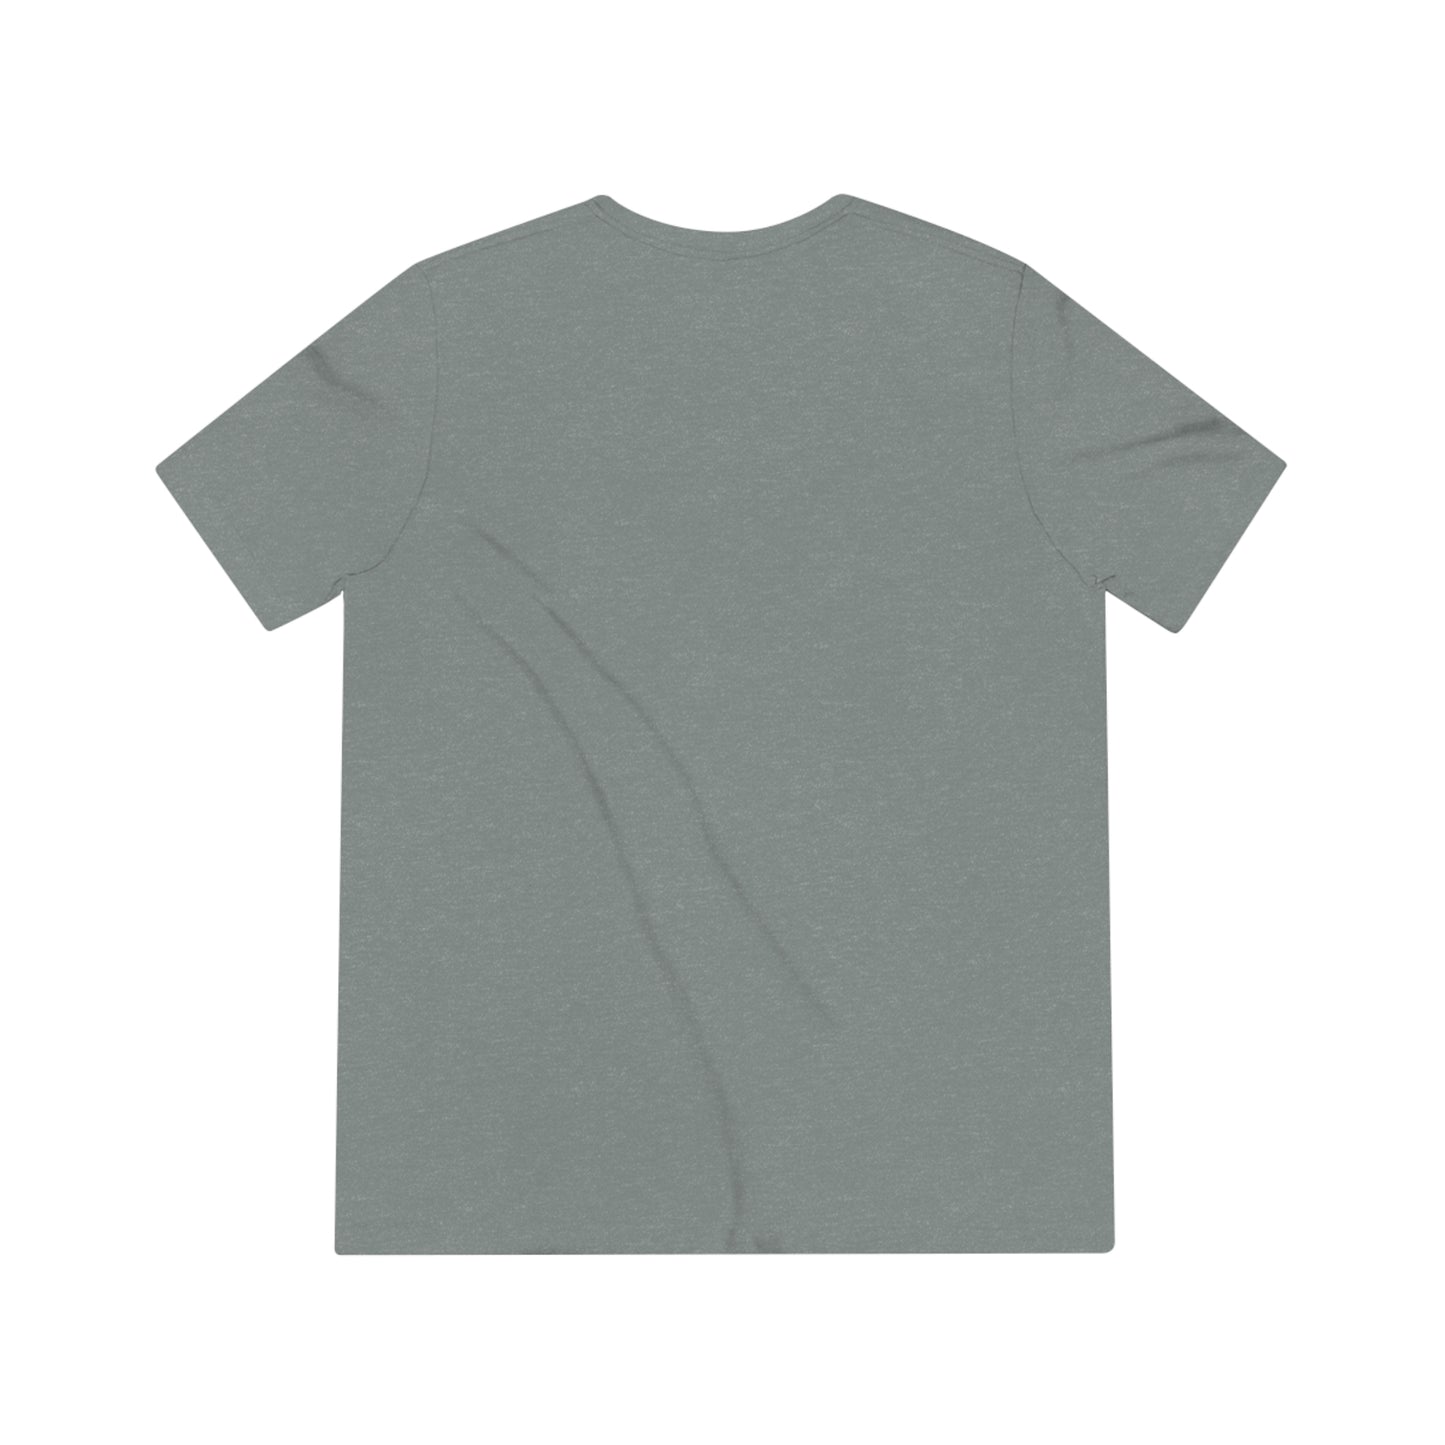 ORO Tactical Triblend Tee